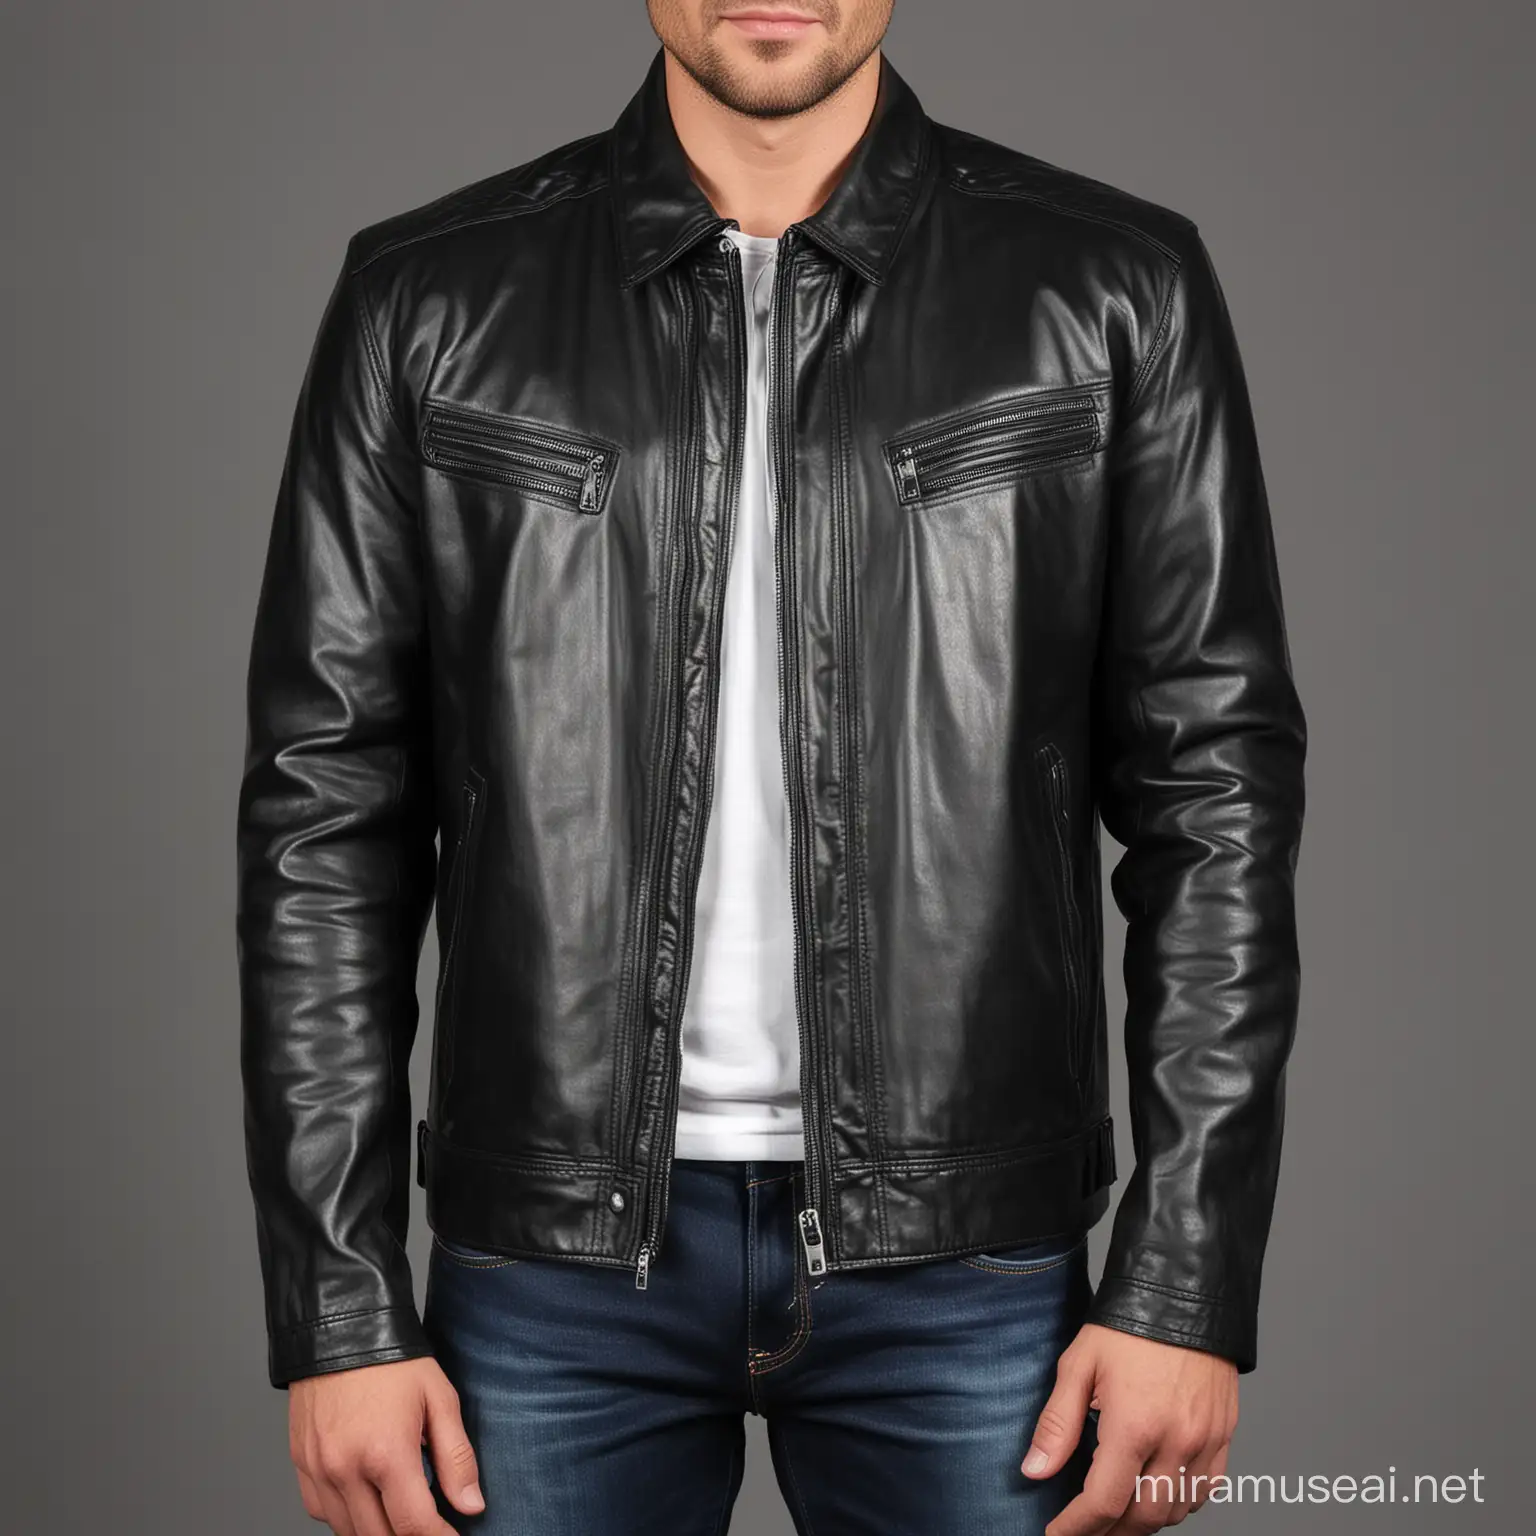 Leather jacket for men with white background with zip